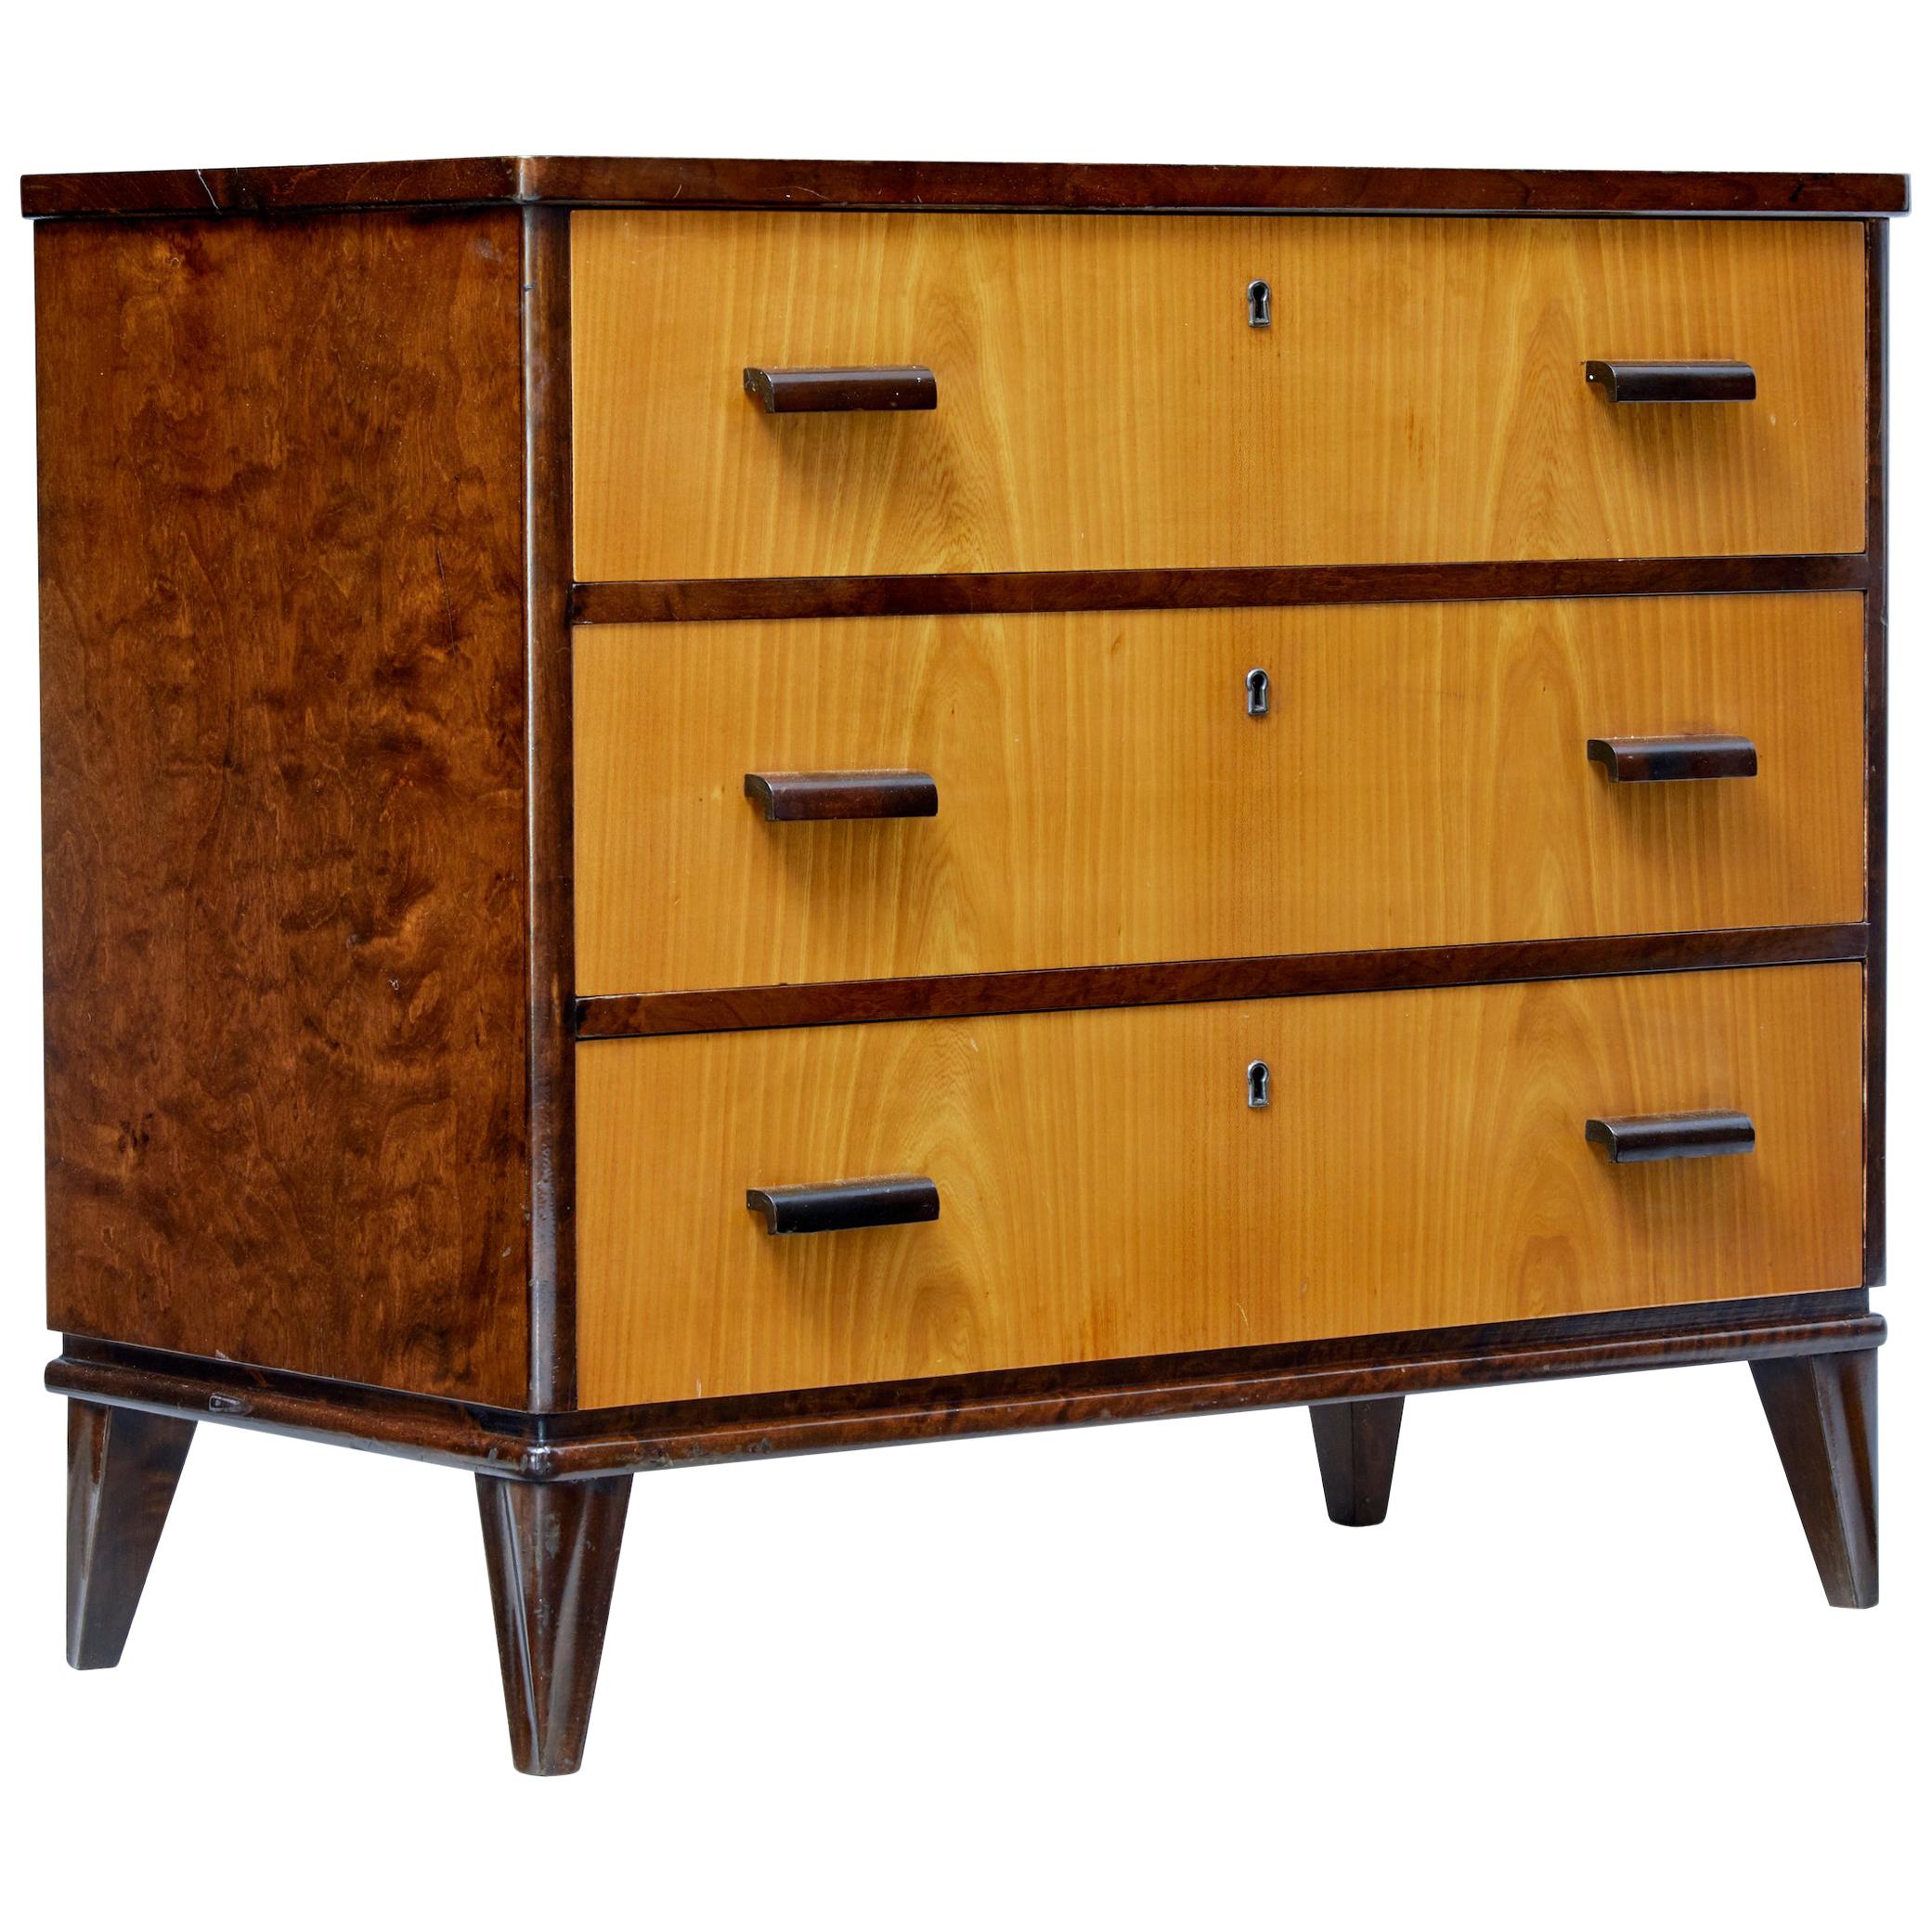 Mid-20th Century Late Art Deco Swedish Birch and Elm Chest of Drawers